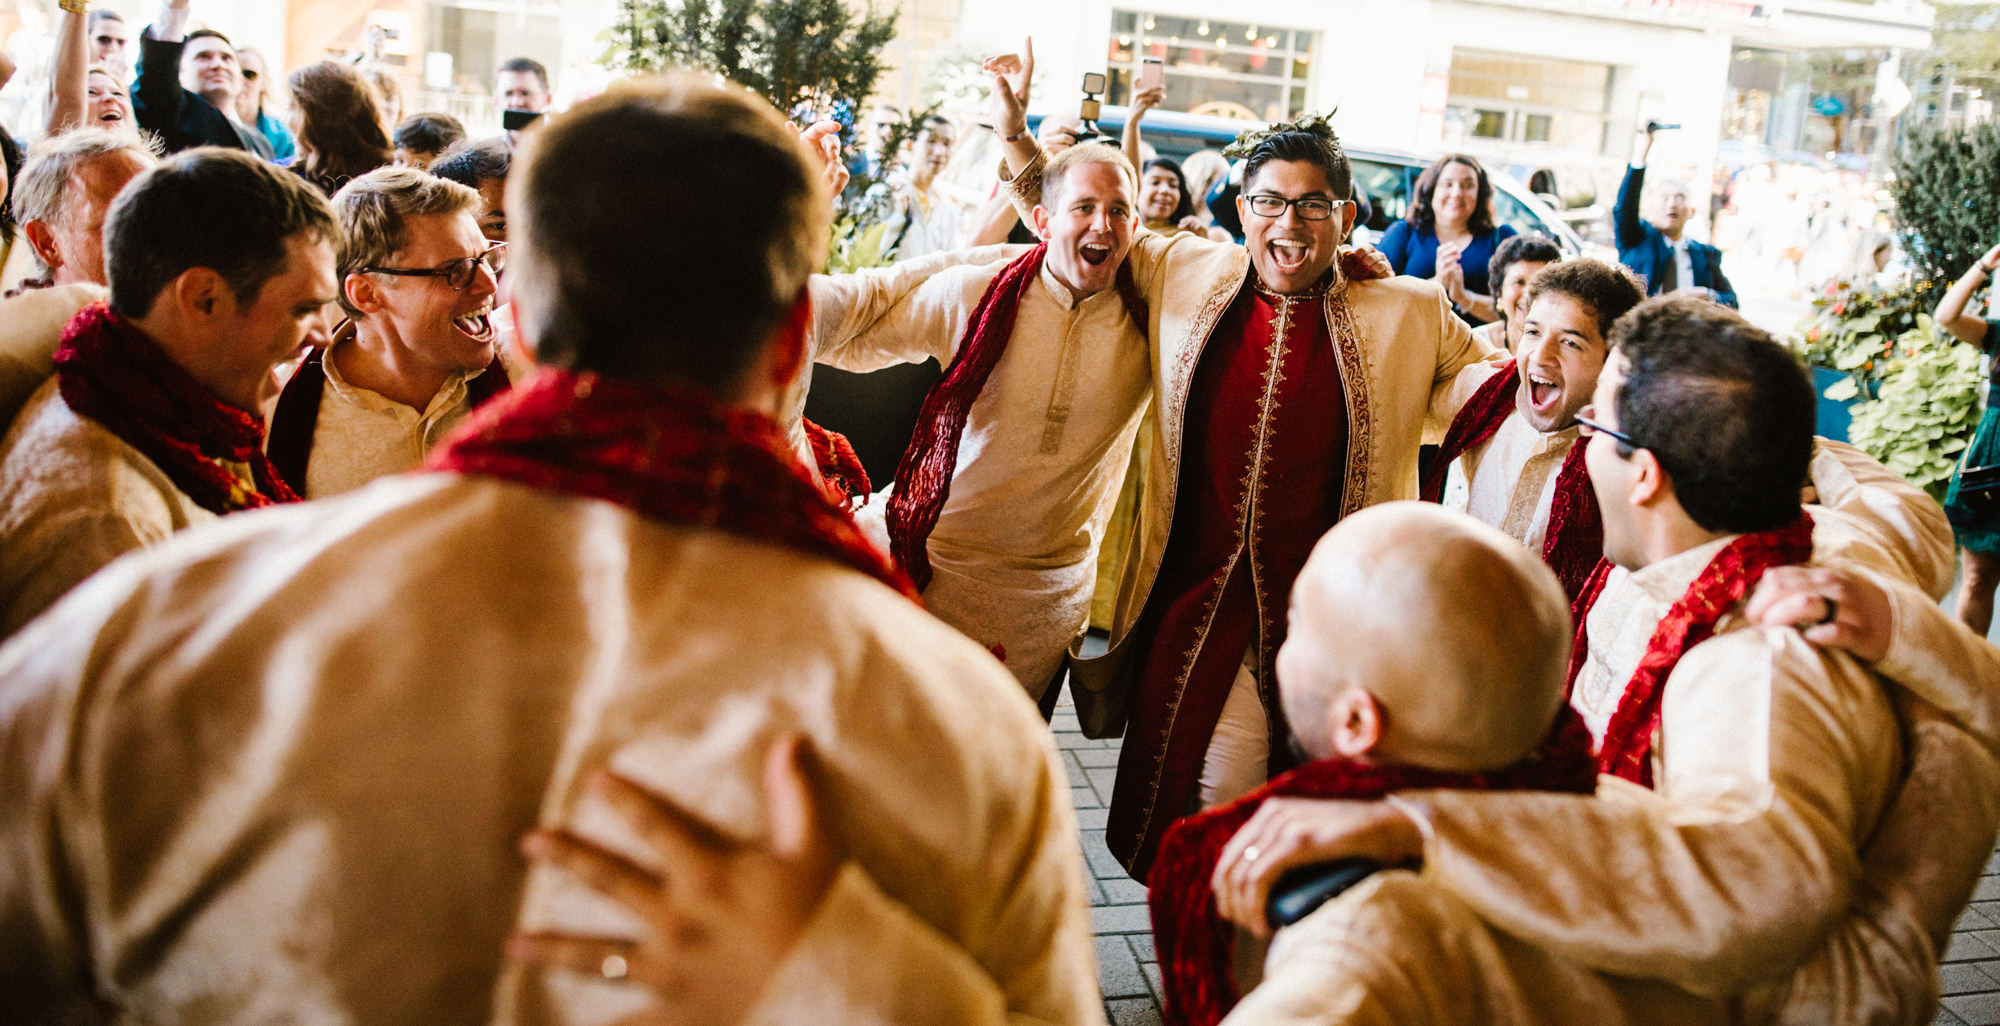 Neel and his groomsmen arrive at his Hindu wedding at the Four Seasons on a rickshaw, dancing bhangra with festive cheers from their guests.